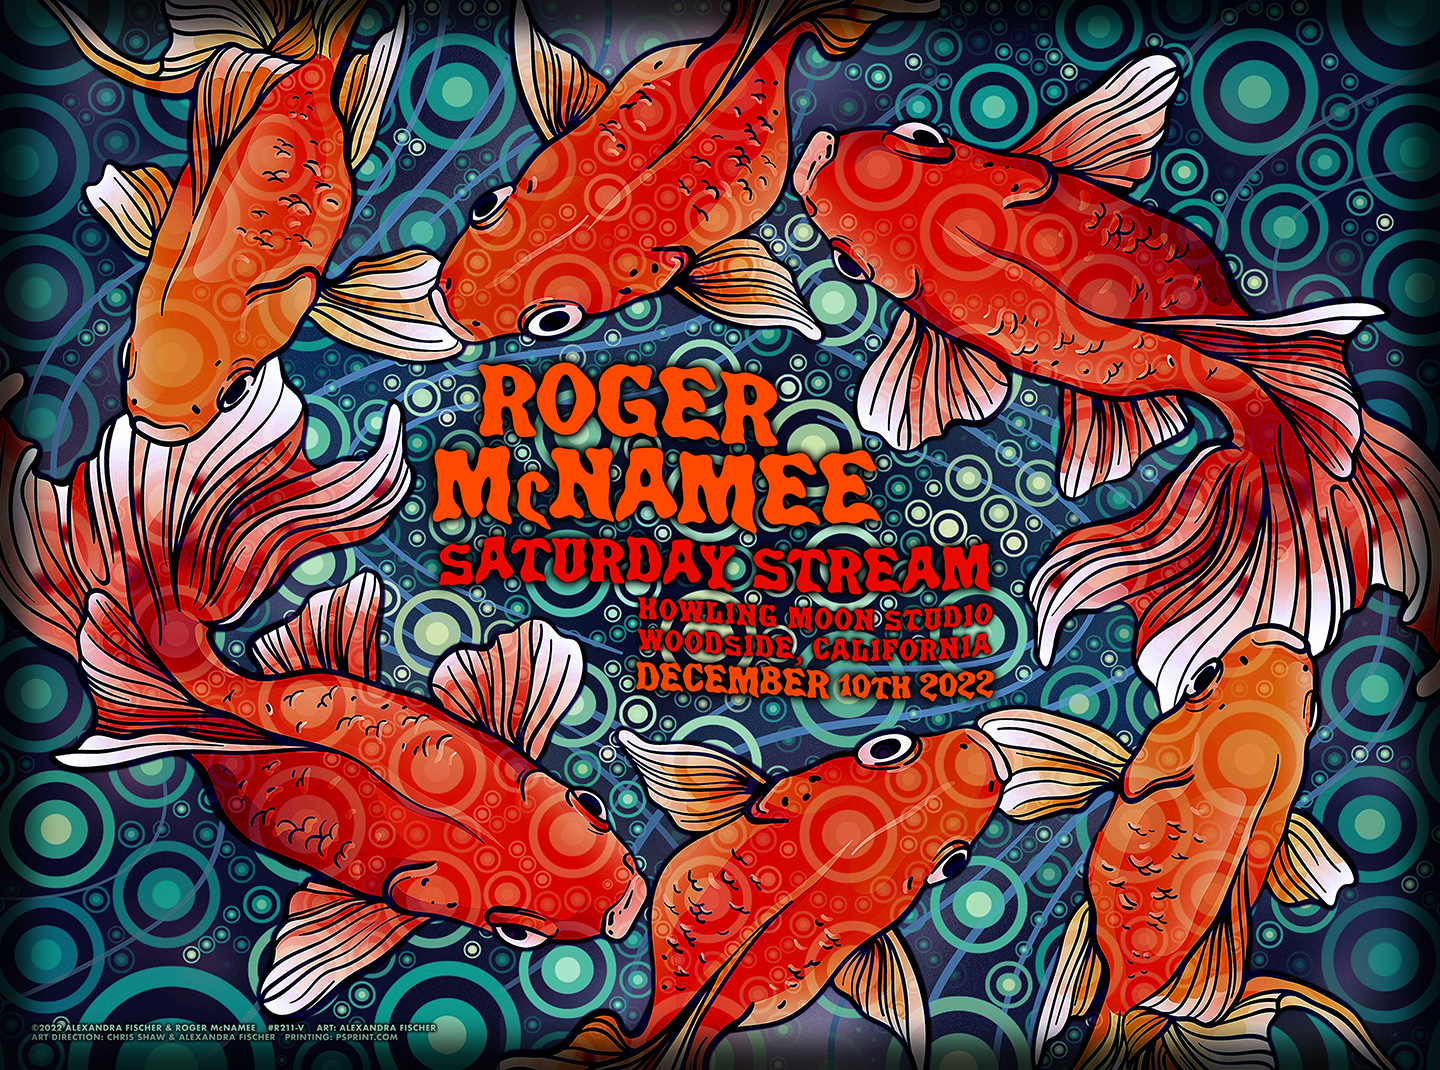 R211V › Roger McNamee 12/10/22 Saturday Stream, Howling Moon Studio, Woodside, California poster by Alexandra Fischer